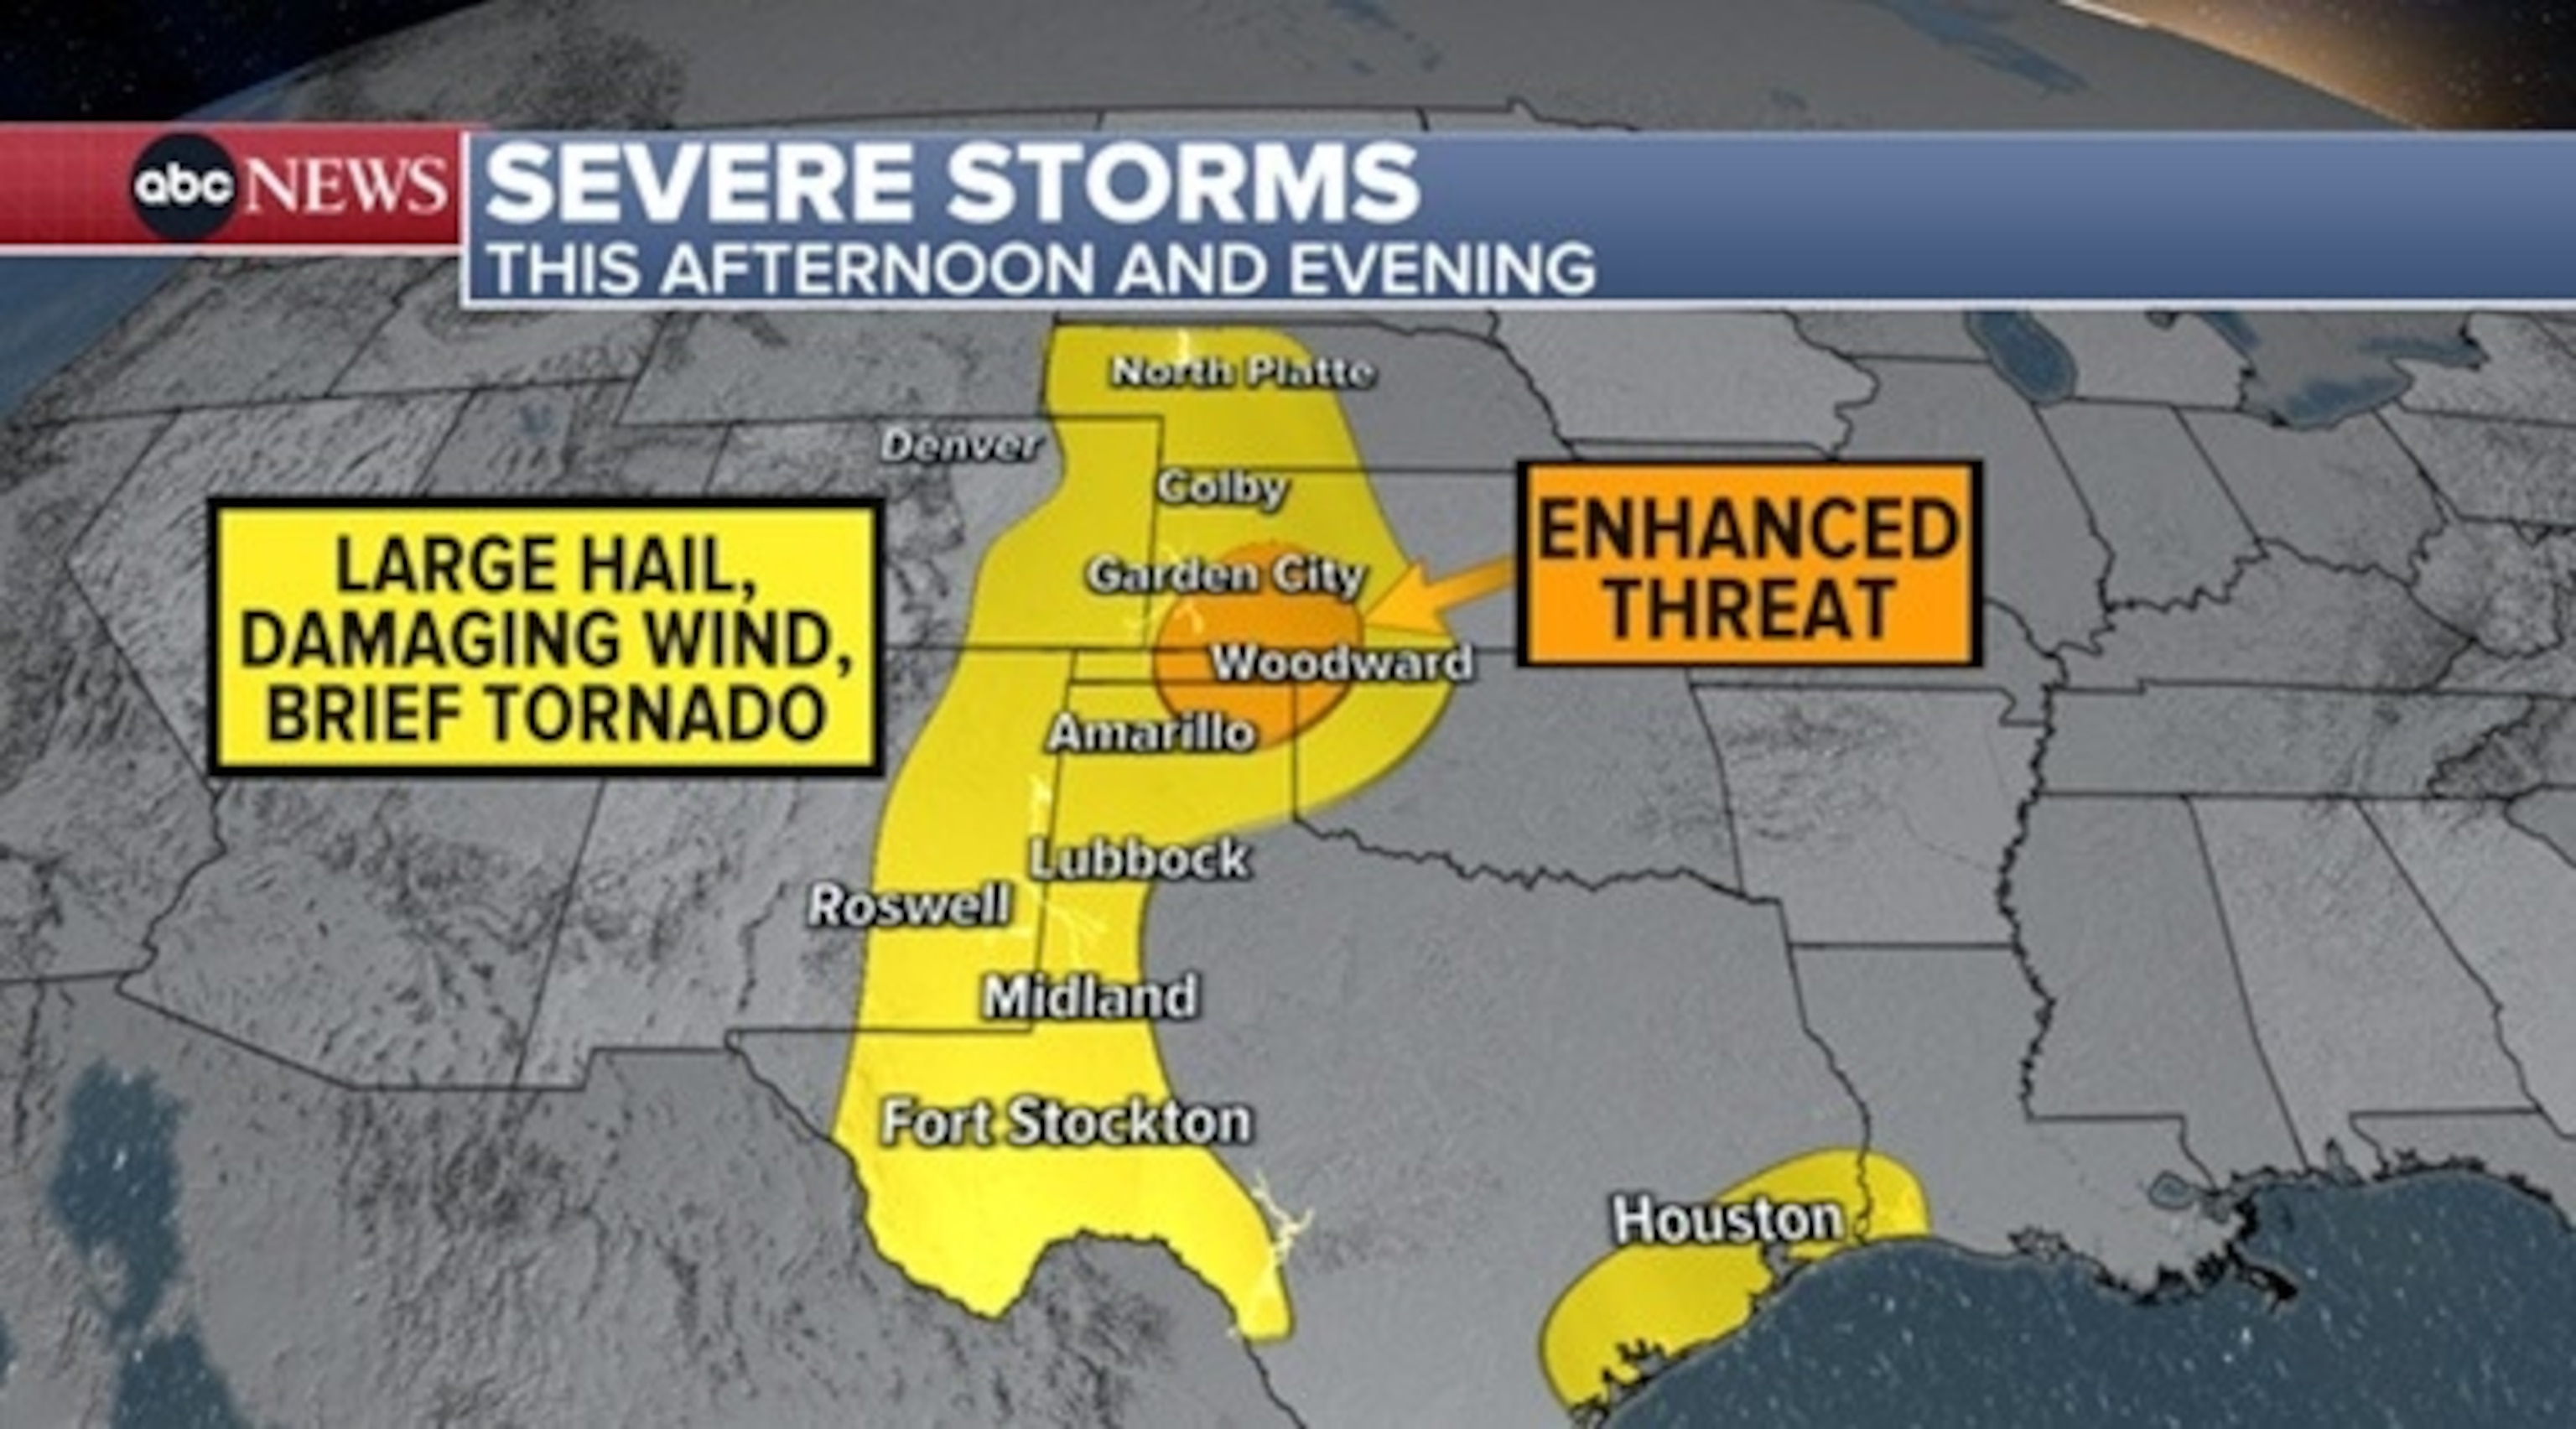 PHOTO: severe storms graphic